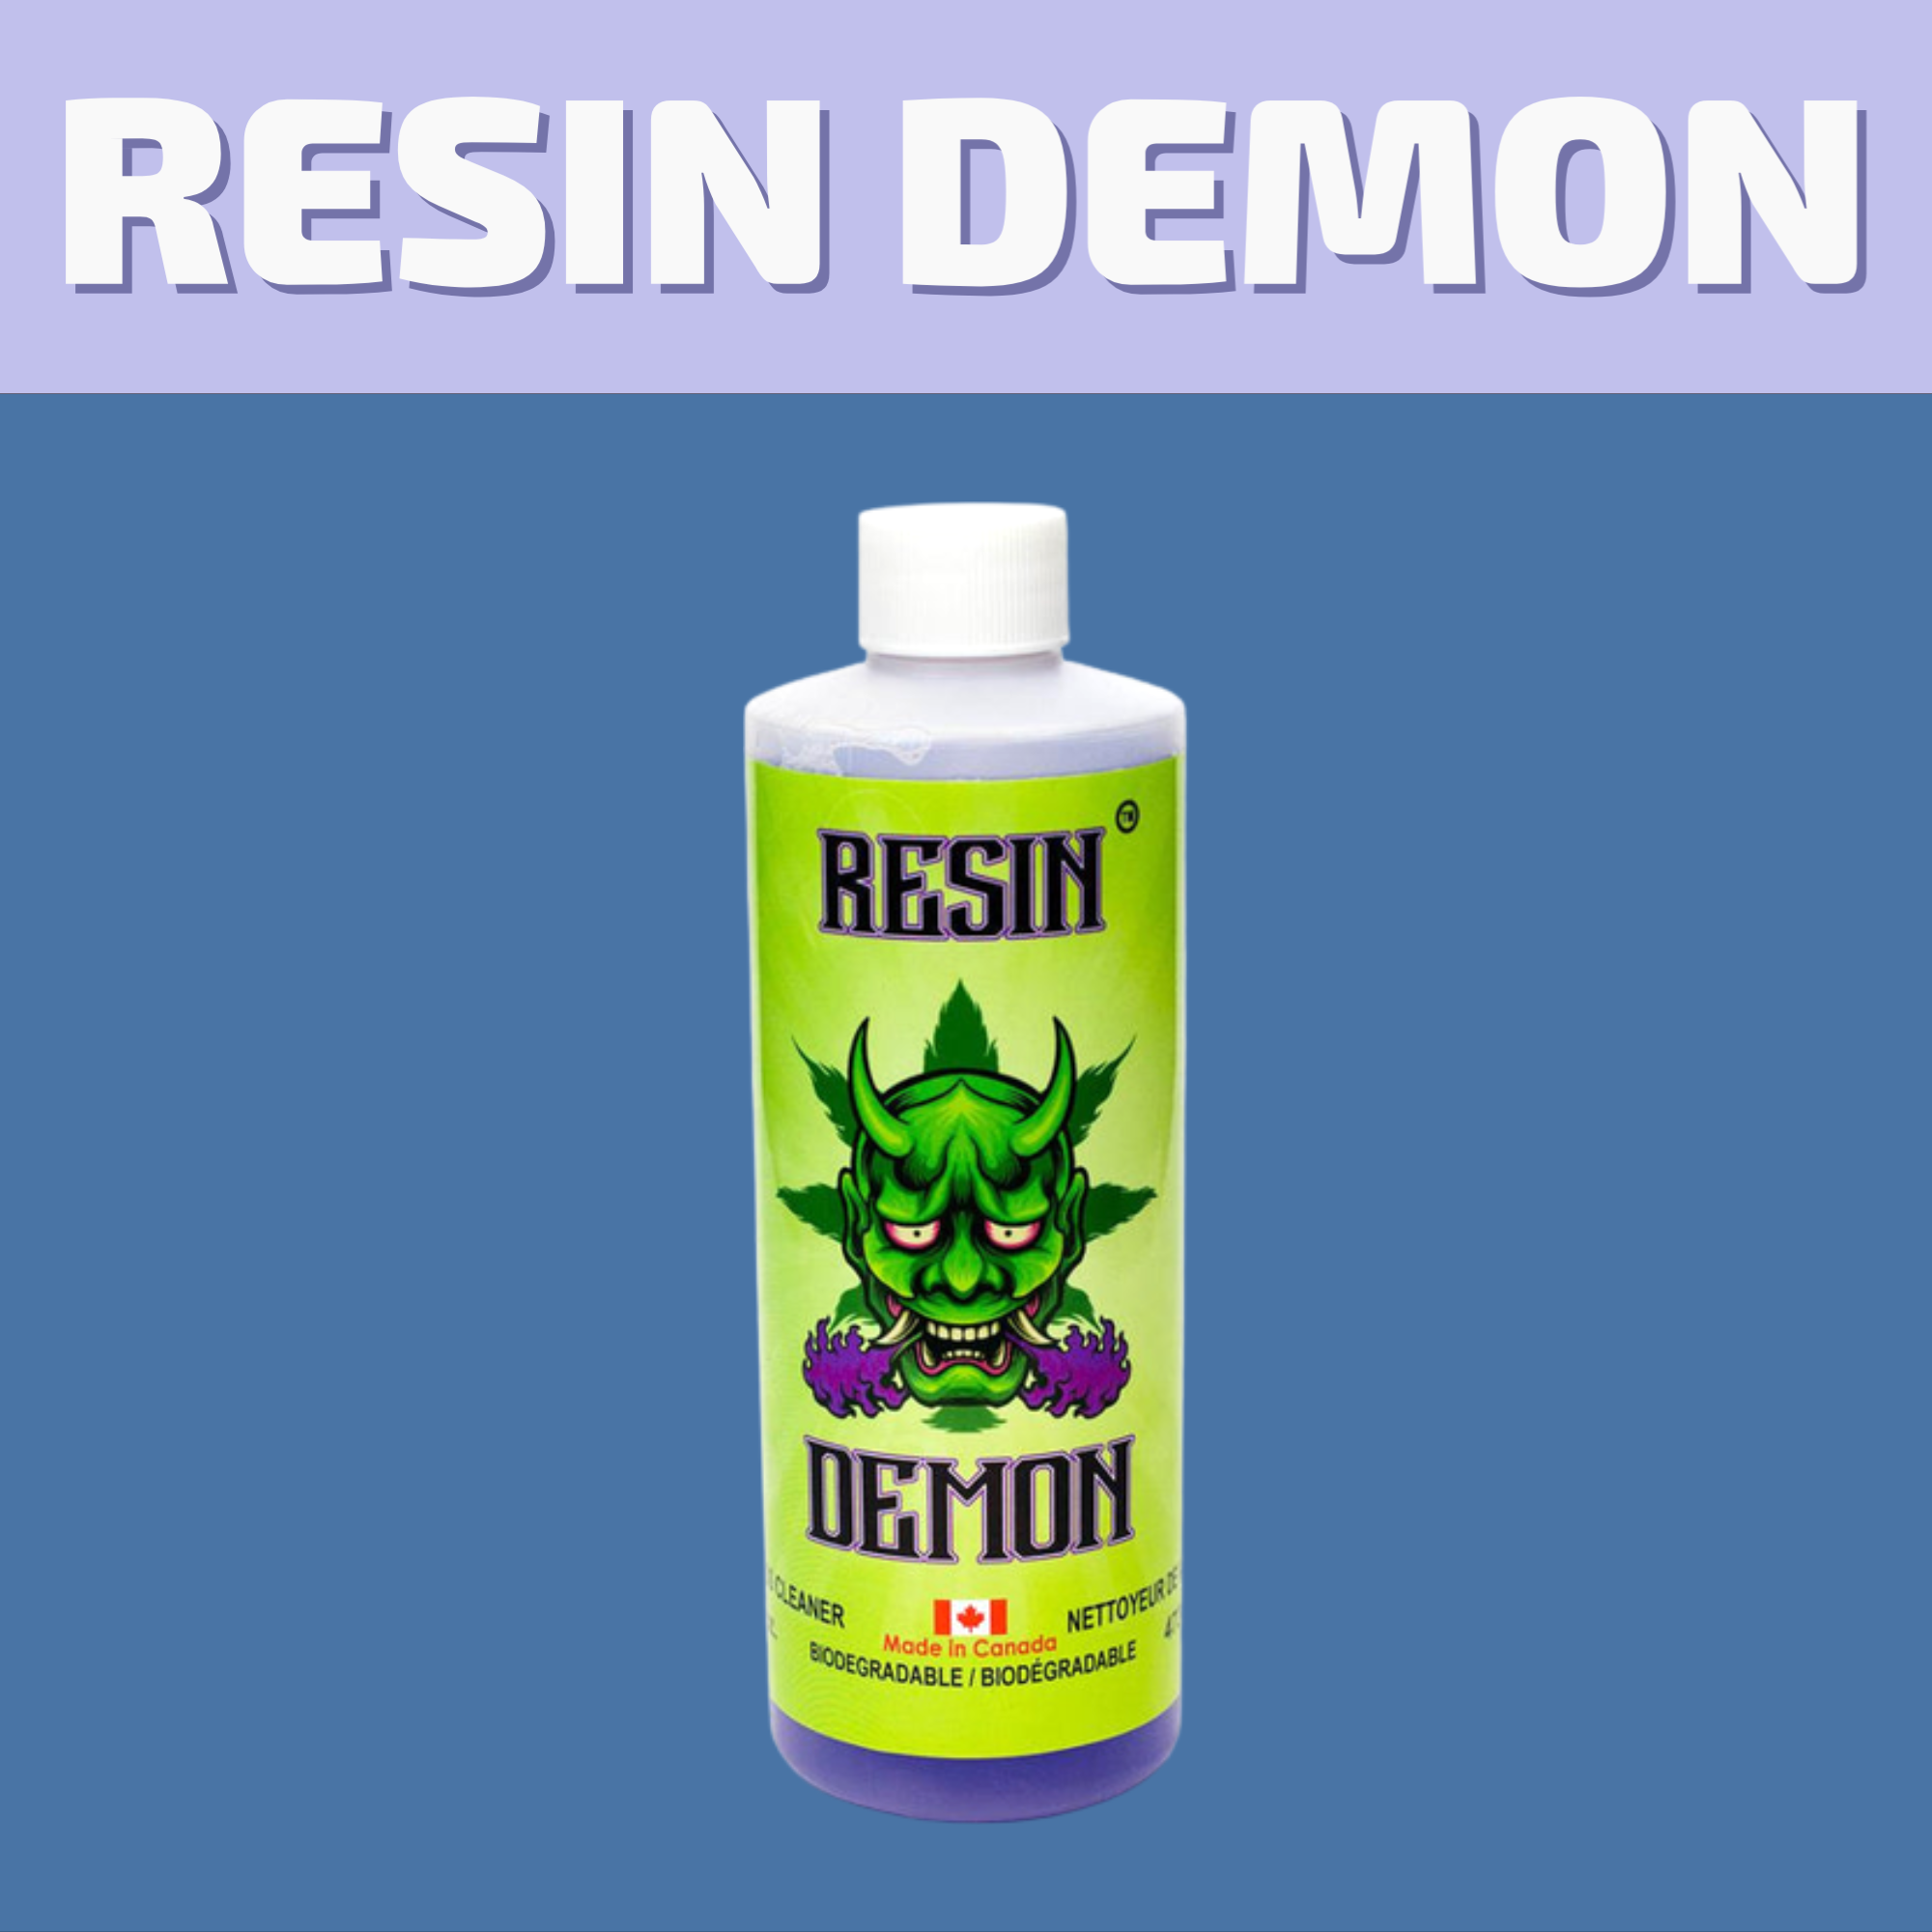 Buy Resin Demon and other bong cleaners for same day delivery or visit the best cannabis store on 580 Academy Road.   